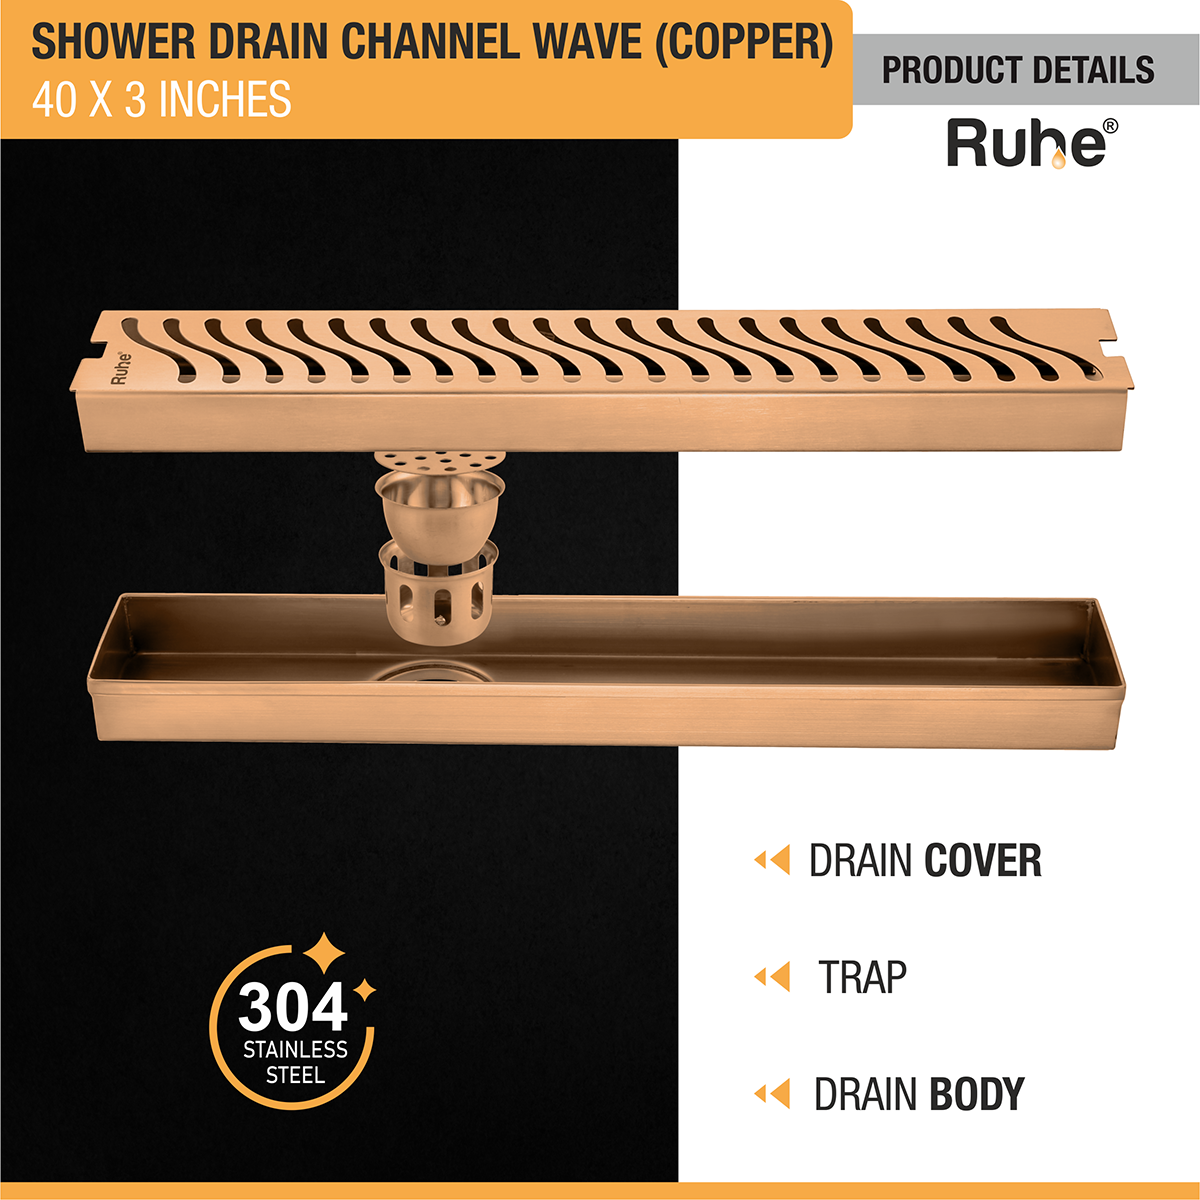 Wave Shower Drain Channel (40 x 3 Inches) ROSE GOLD/ANTIQUE COPPER product details